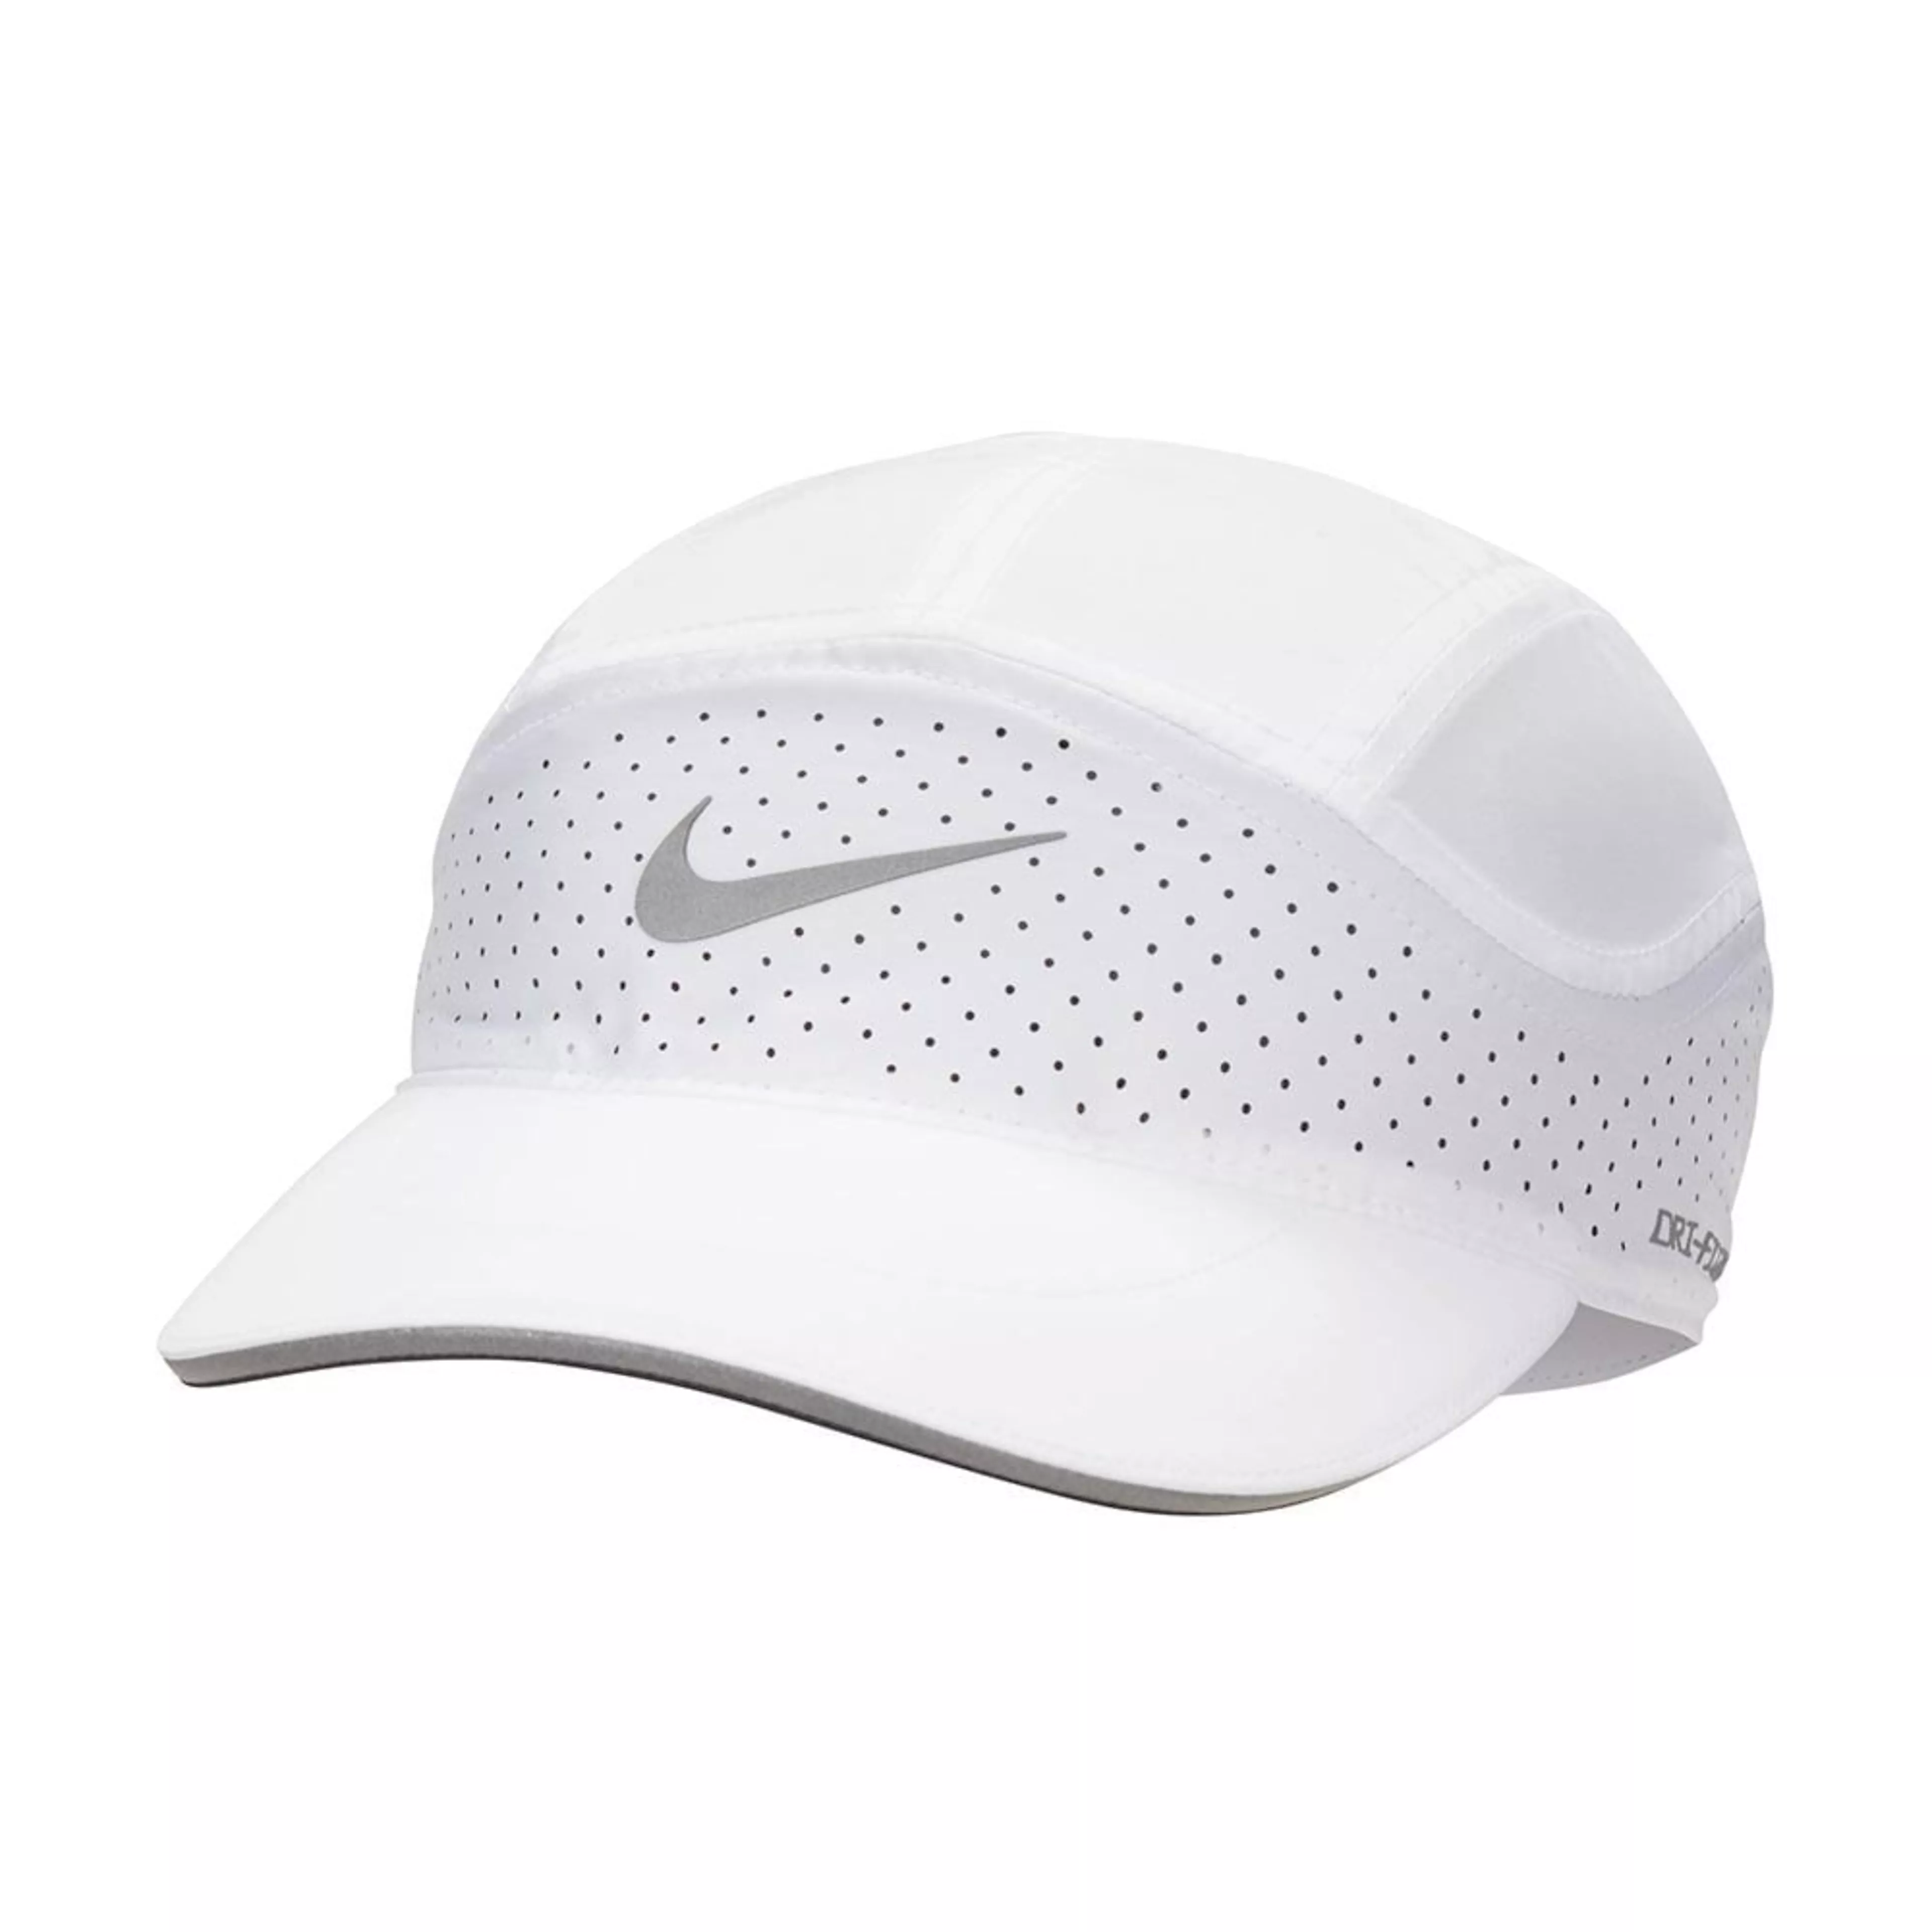 Dri-Fit ADV Fly Unstructured Caps, unisex